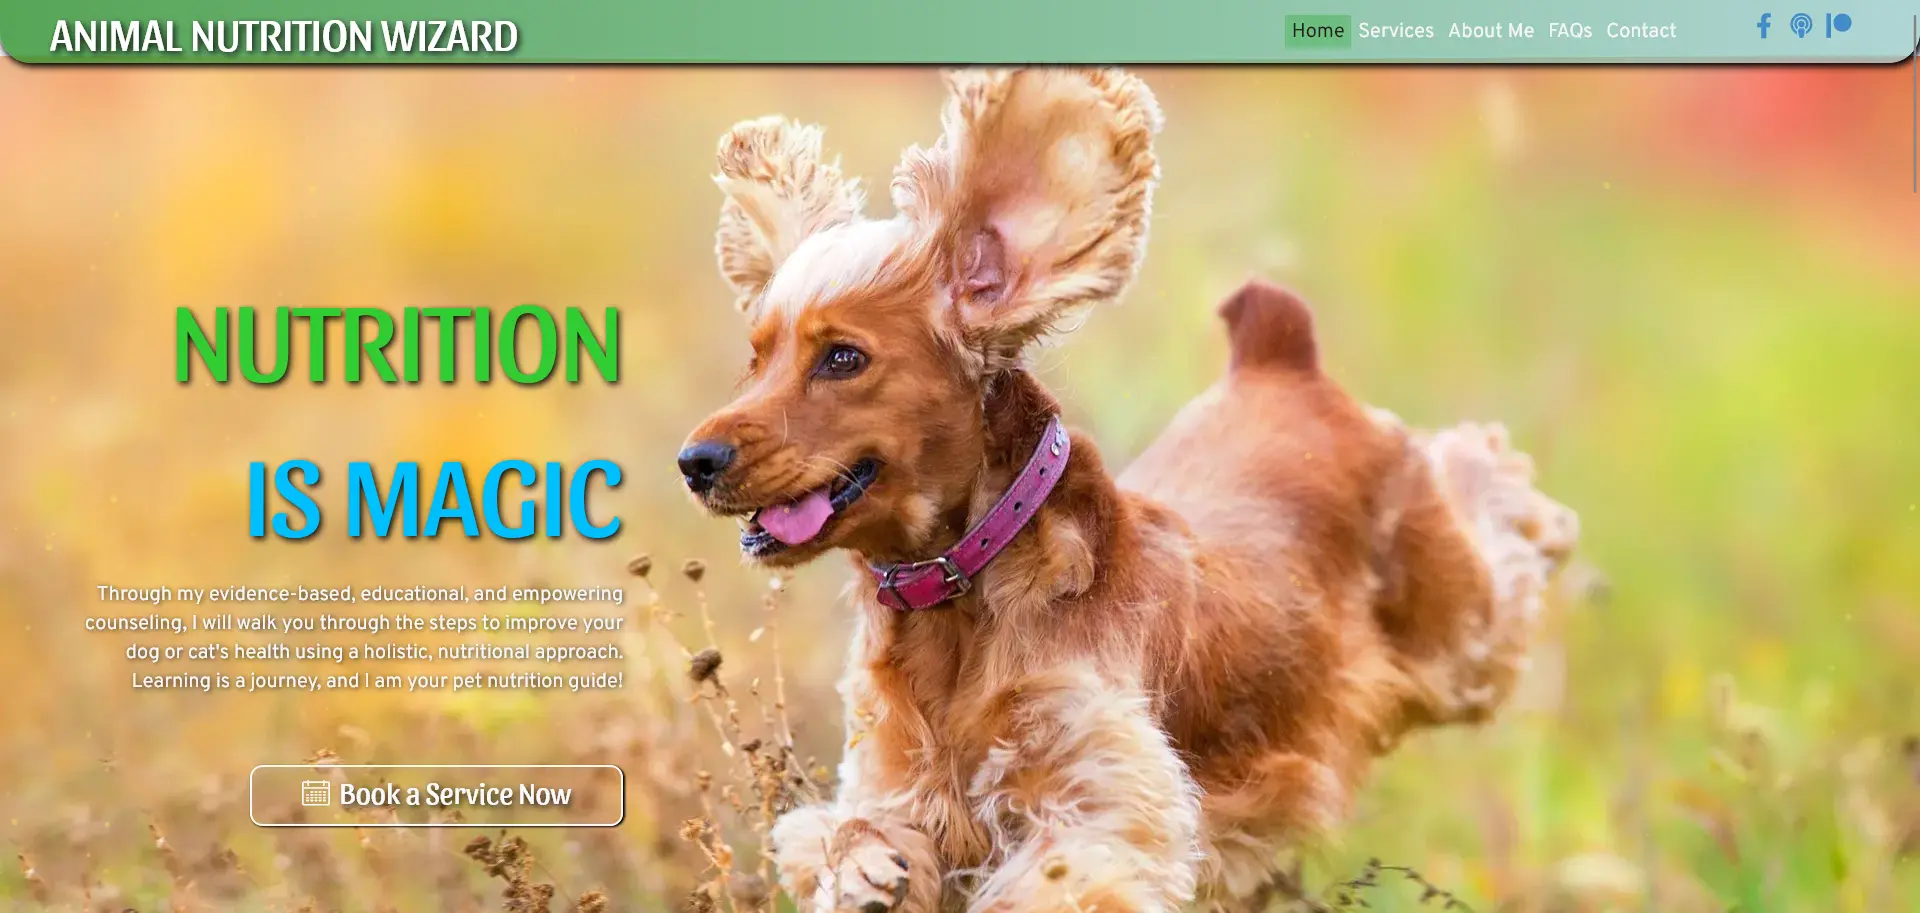 The website for Animal Nutrition Wizard.